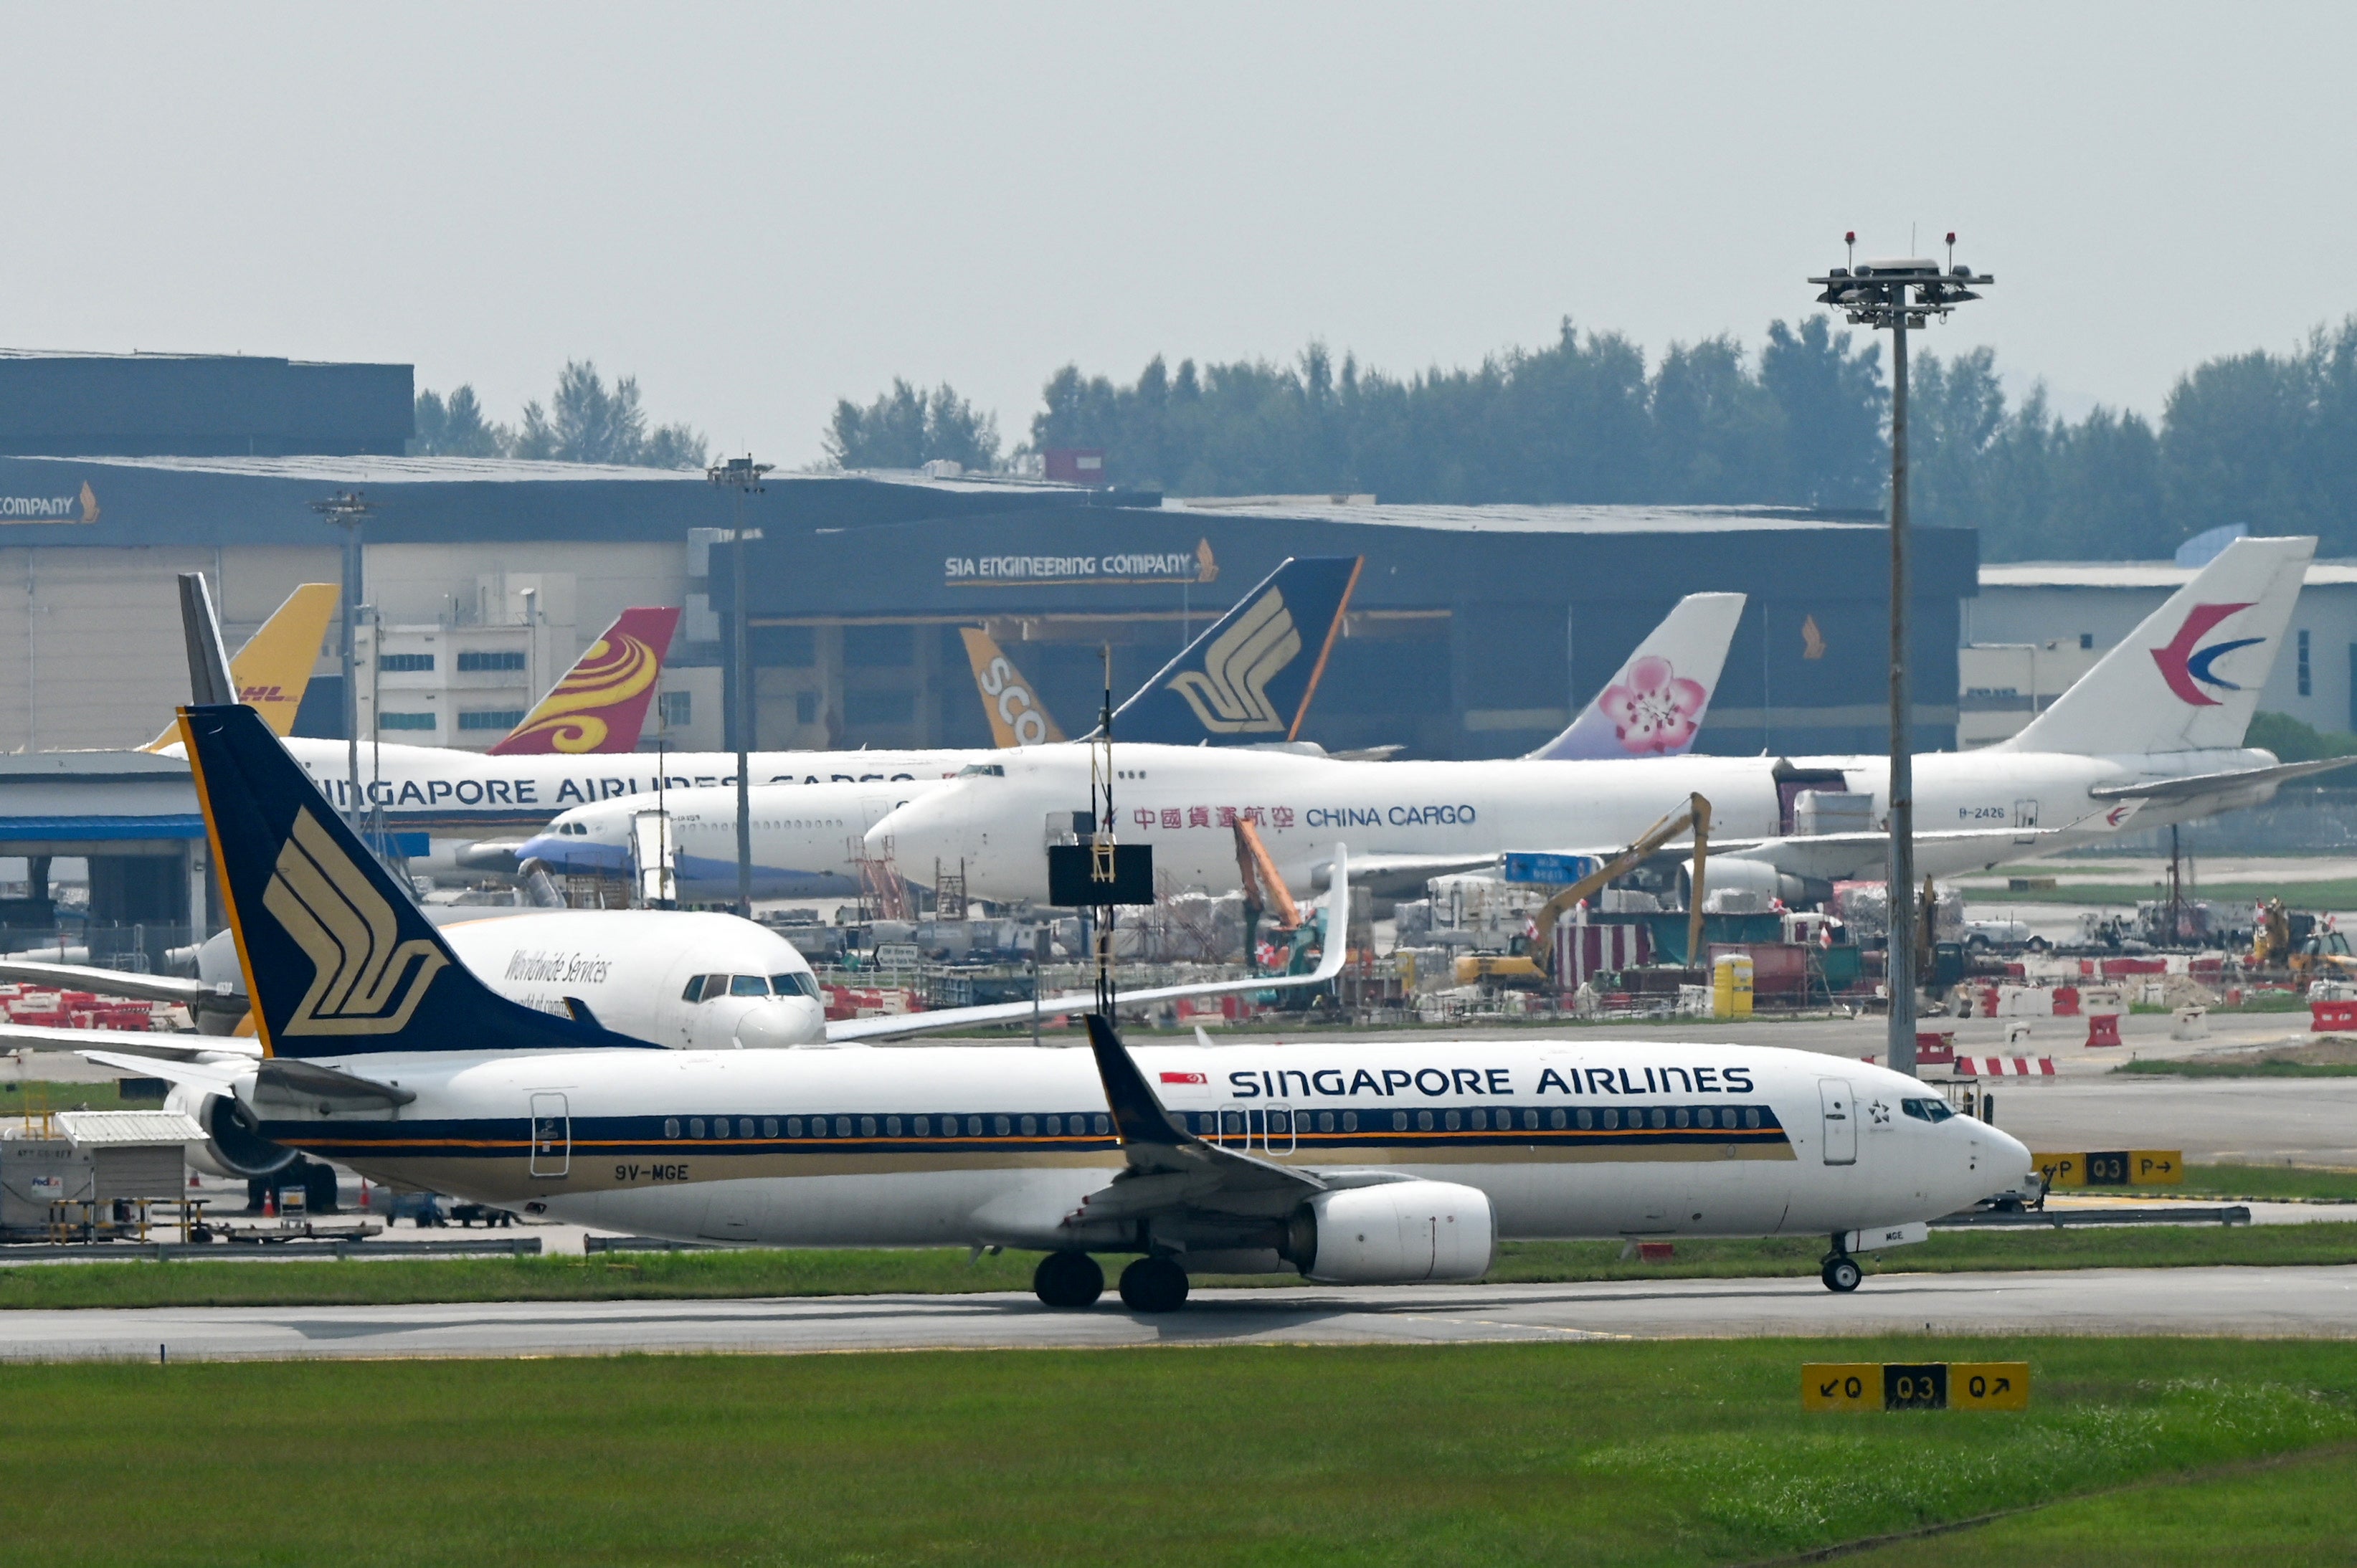 File photo: A Singapore Airlines plane plies along the tarmac of Singapore Changi Airport in Singapore